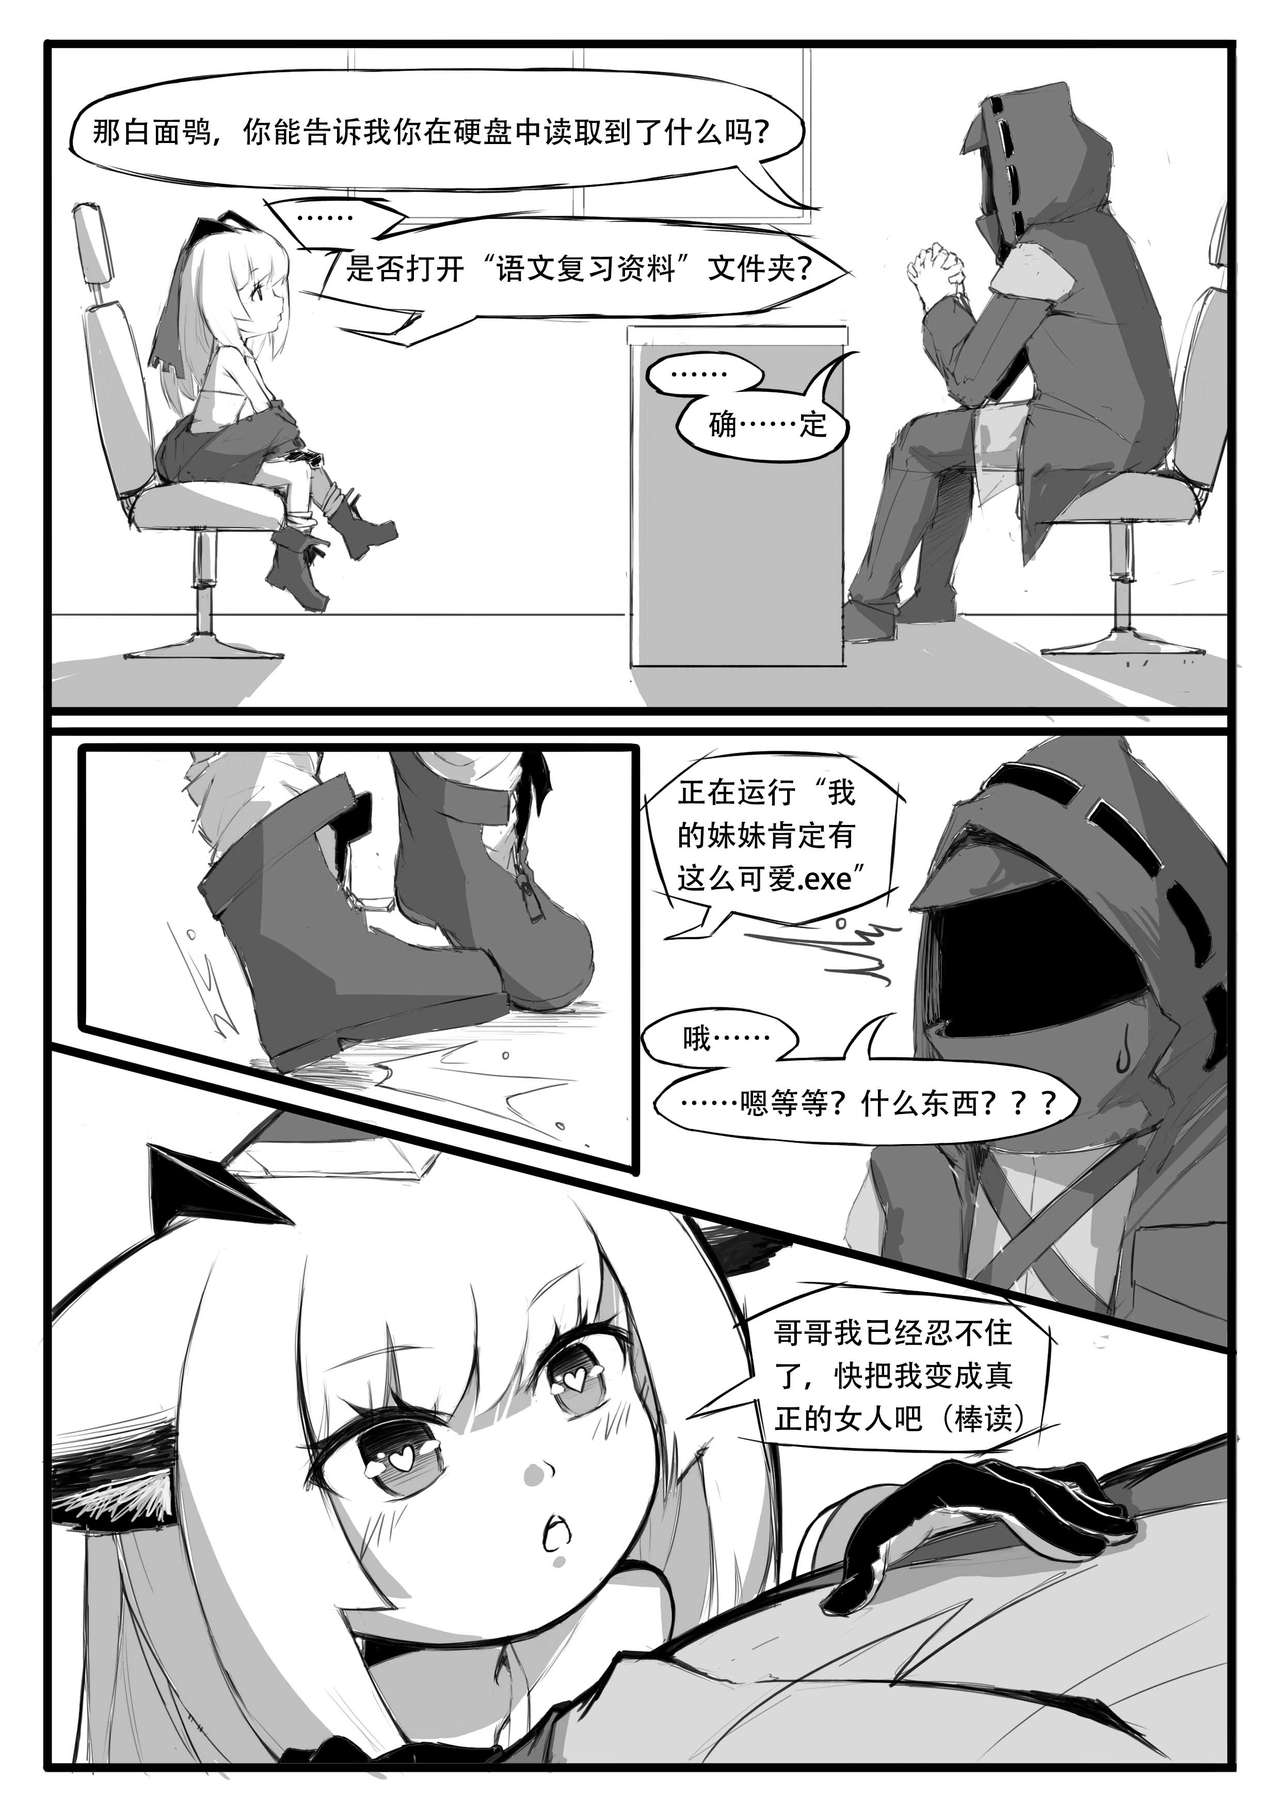 [saluky] 关于白面鸮变成了幼女这件事 (Arknights) [Chinese] page 11 full